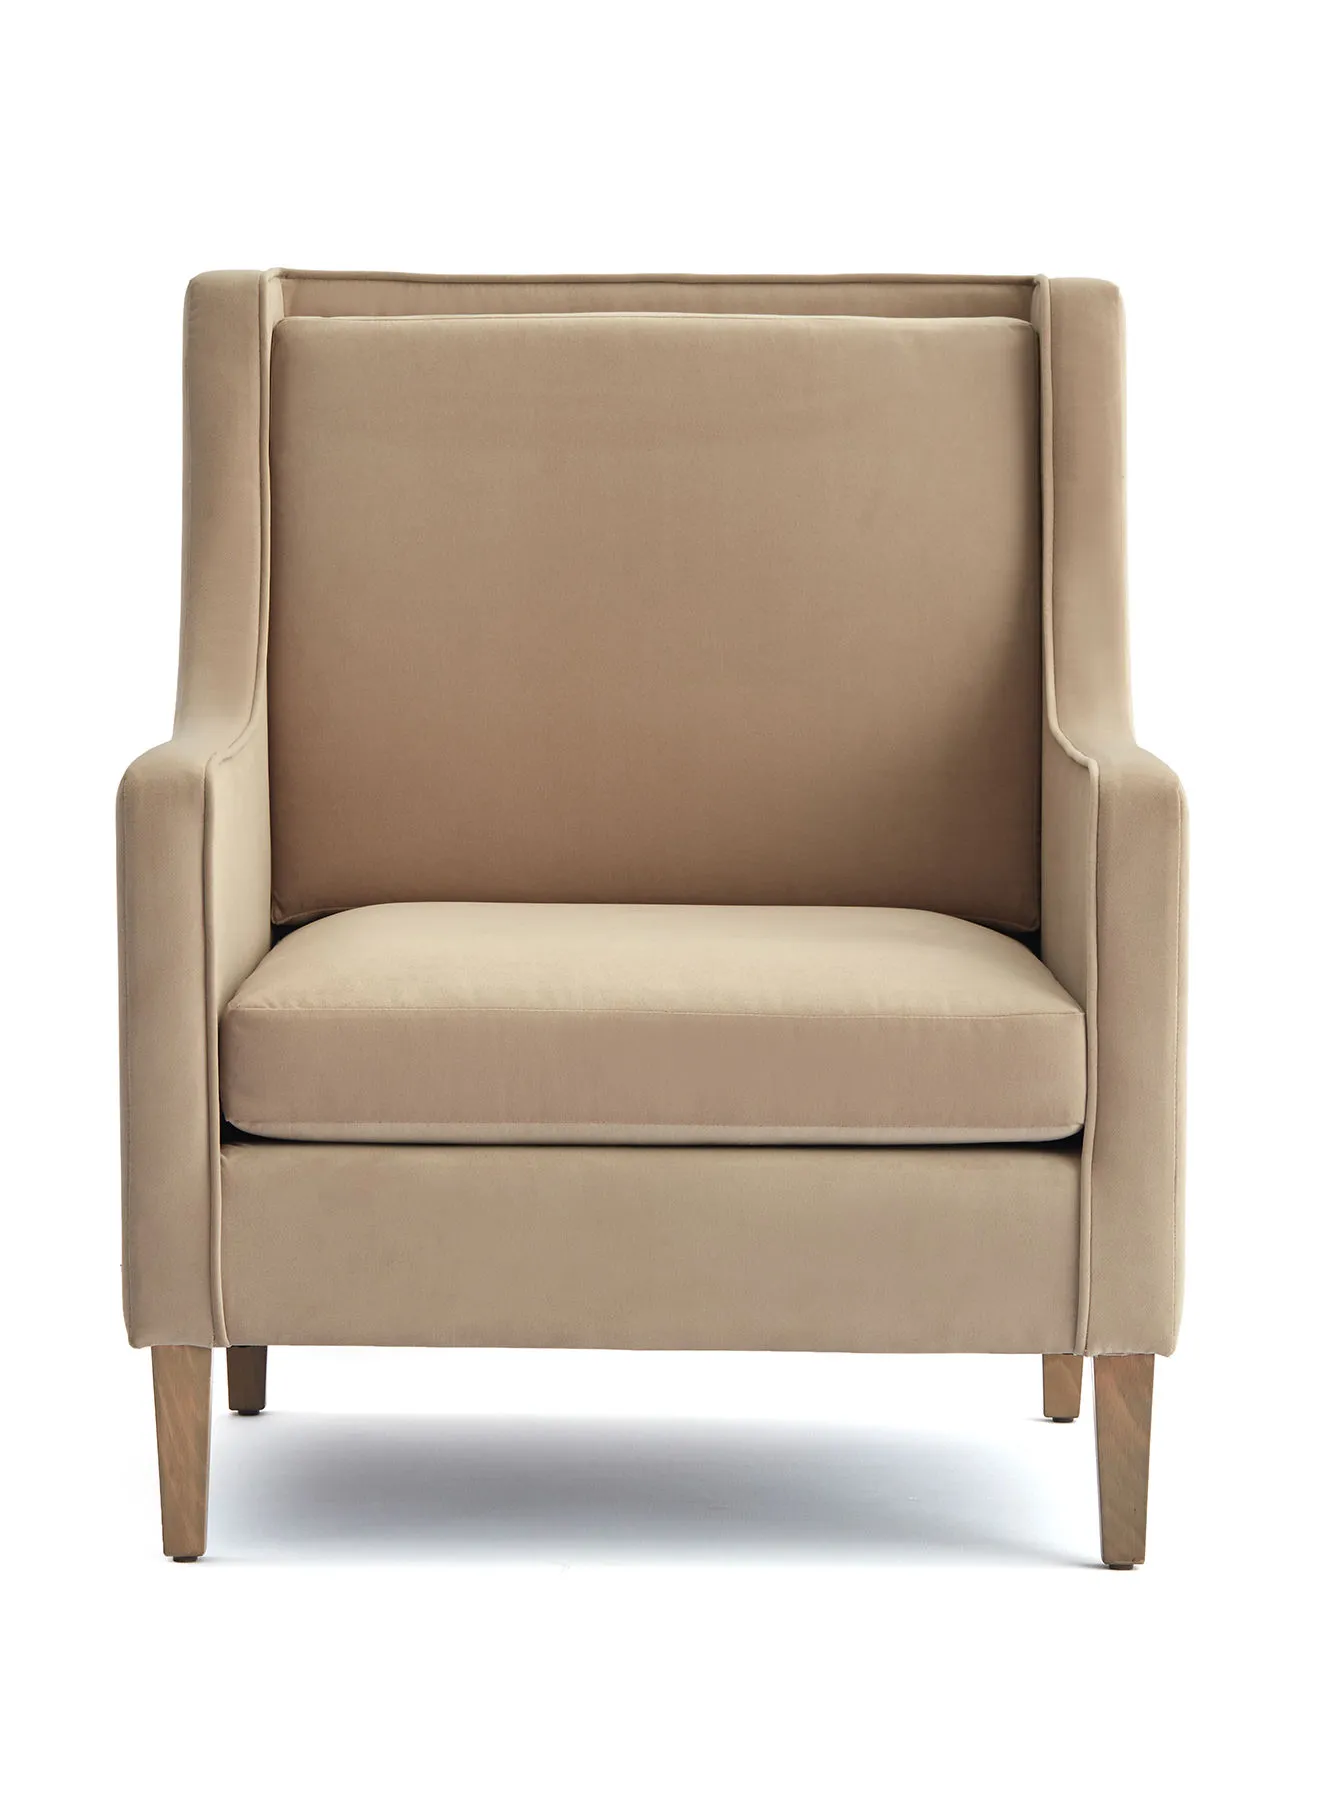 ebb & flow Armchair Luxurious - Upholstered Fabric Greyish Brown Wood Couch - 760 X 885 X 940 - Relaxing Sofa